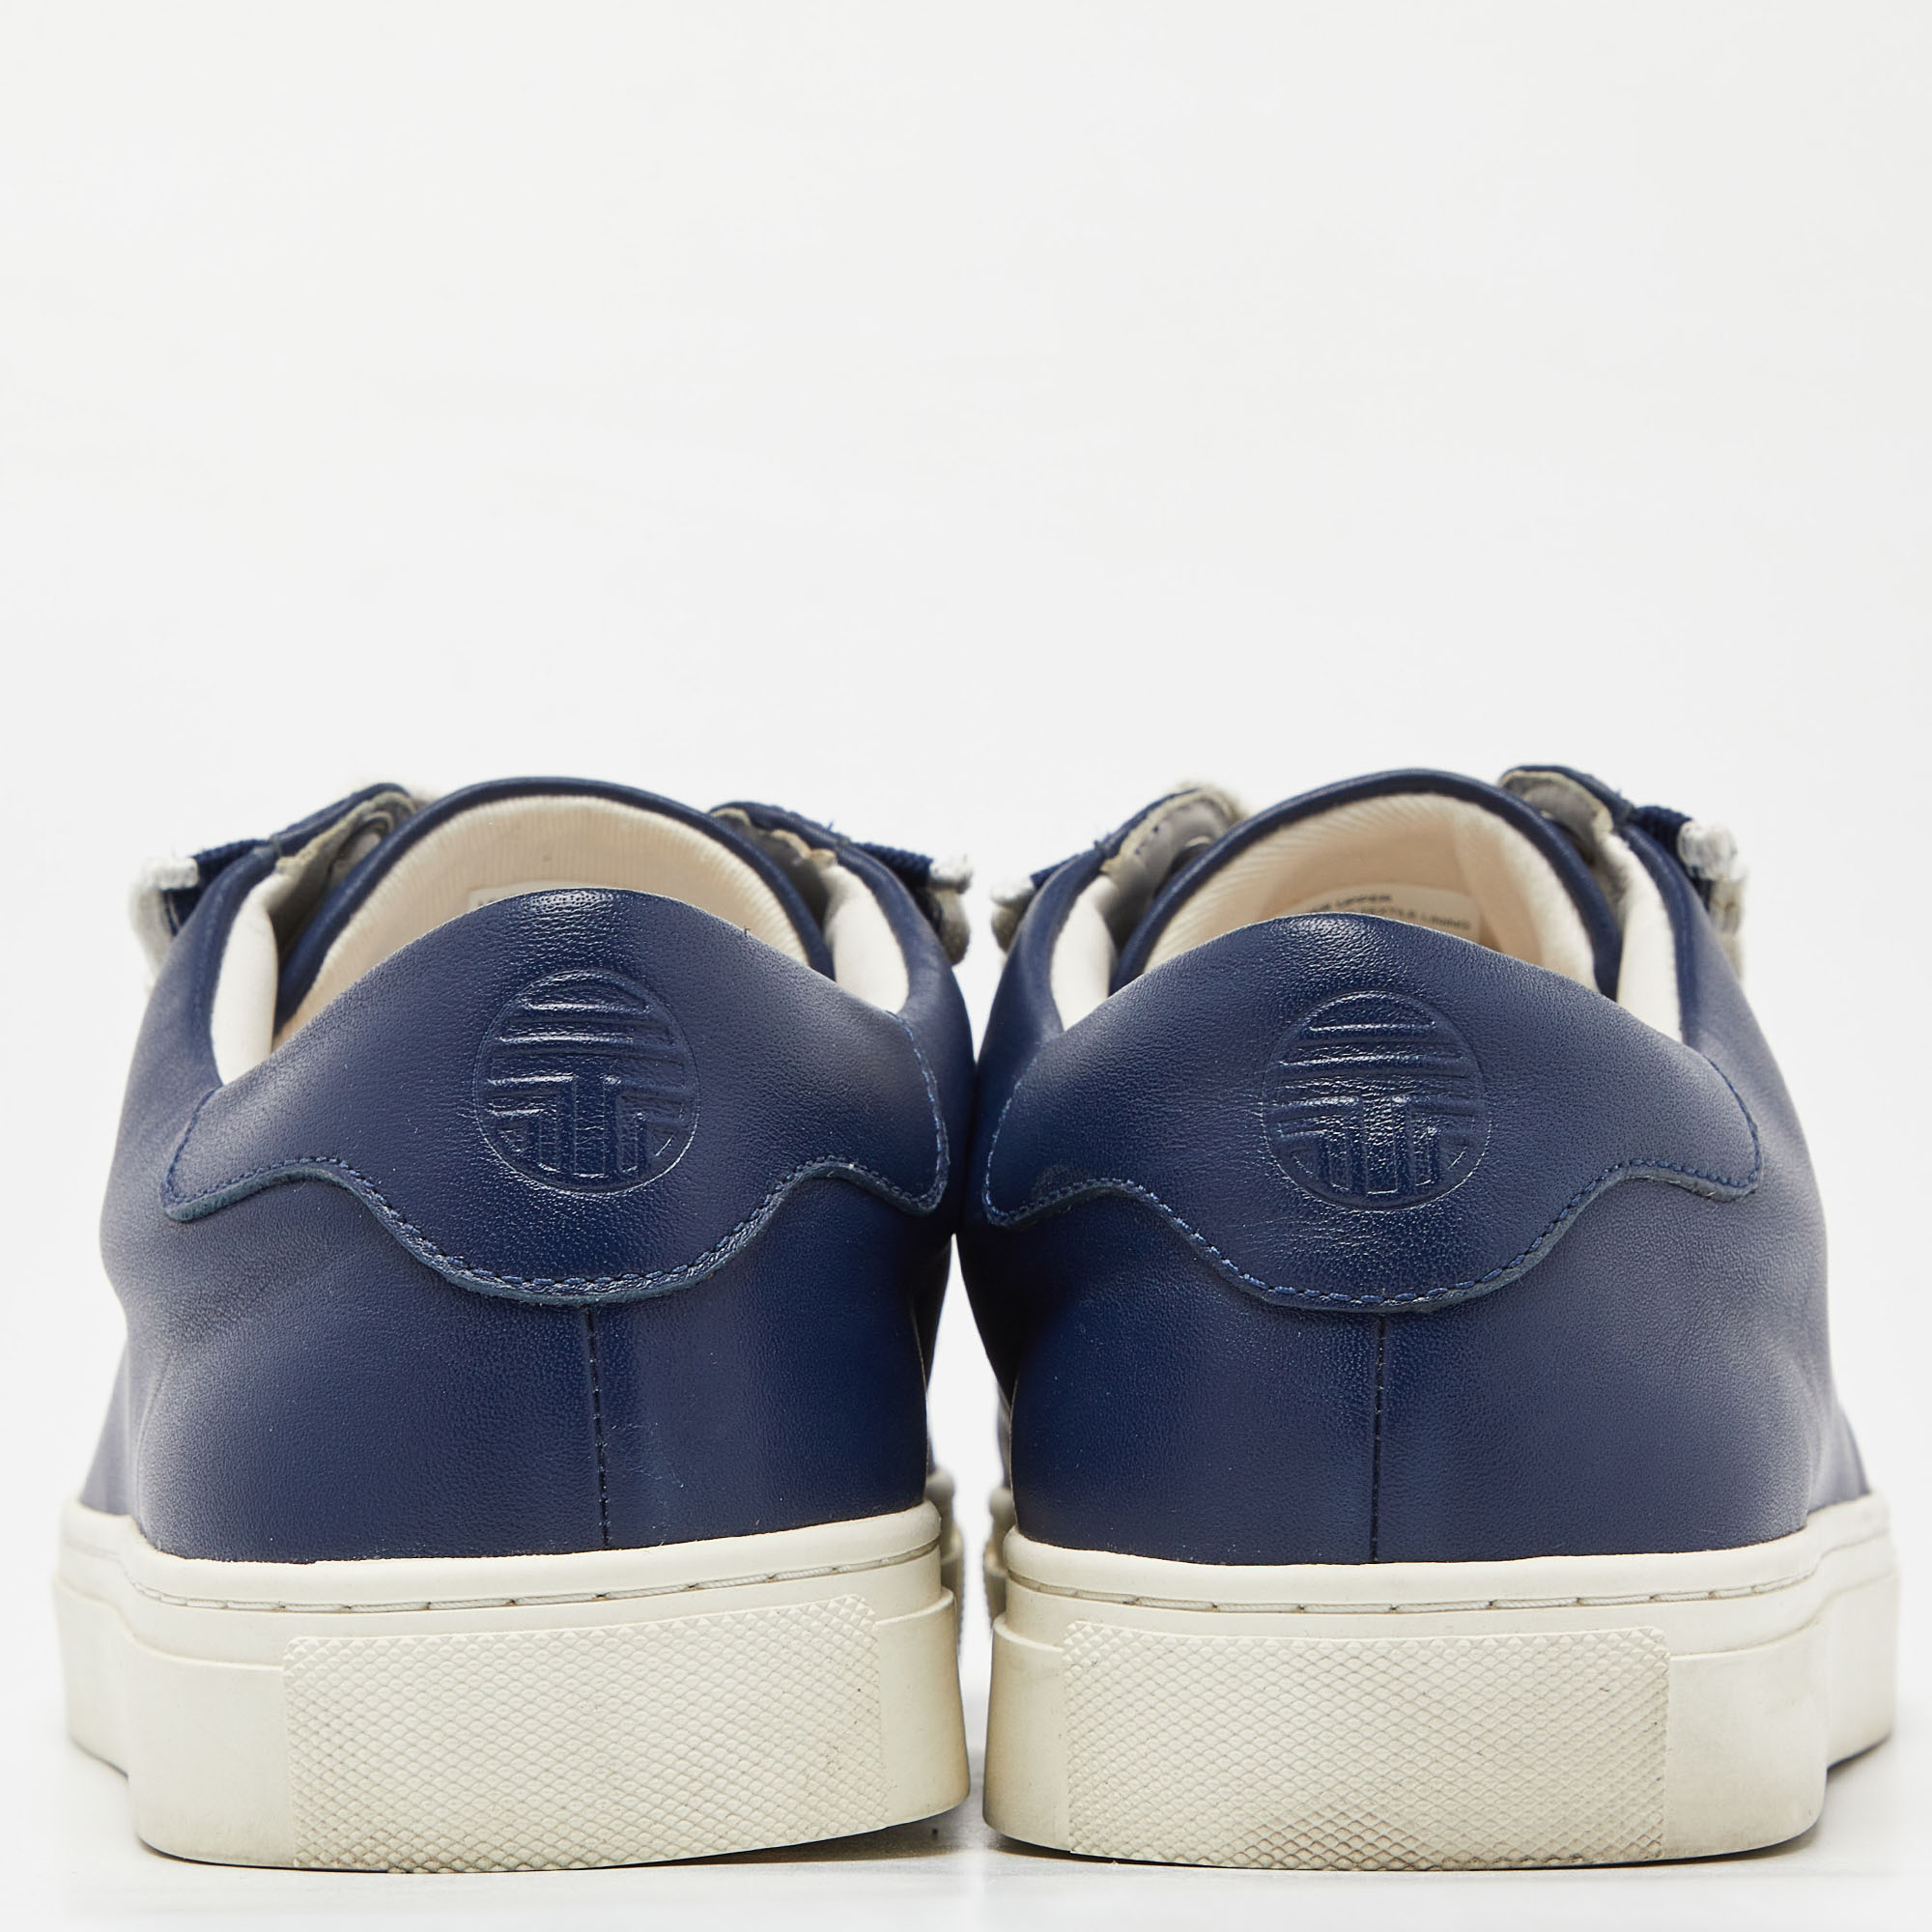 Tory Burch Blue Leather Low Top Sneakers Size 41